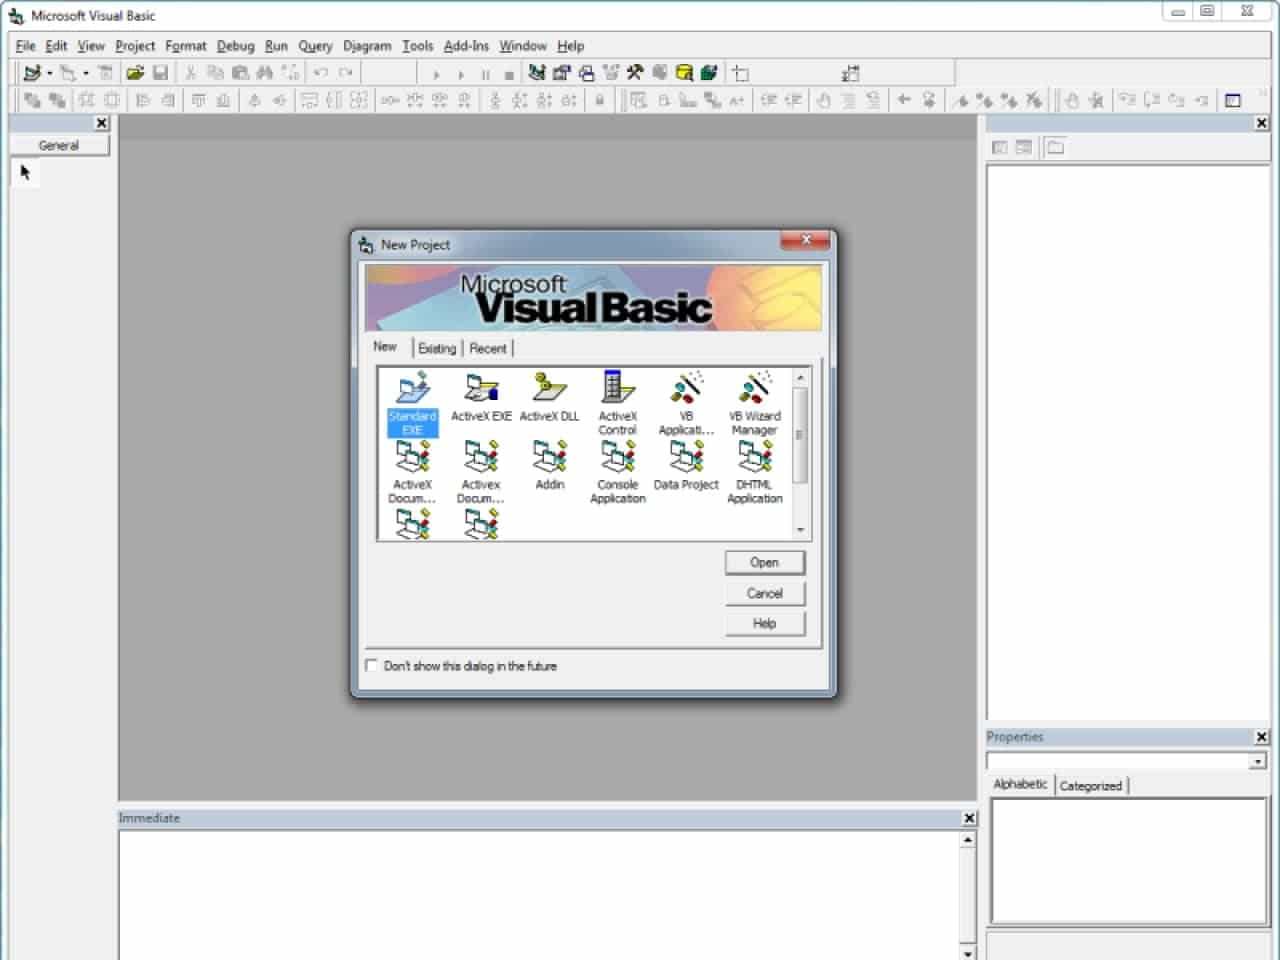 A screenshot showing the Visual Basic 1.0 starting interface. There is 1 button in the left panel but two rows of buttons on the top.